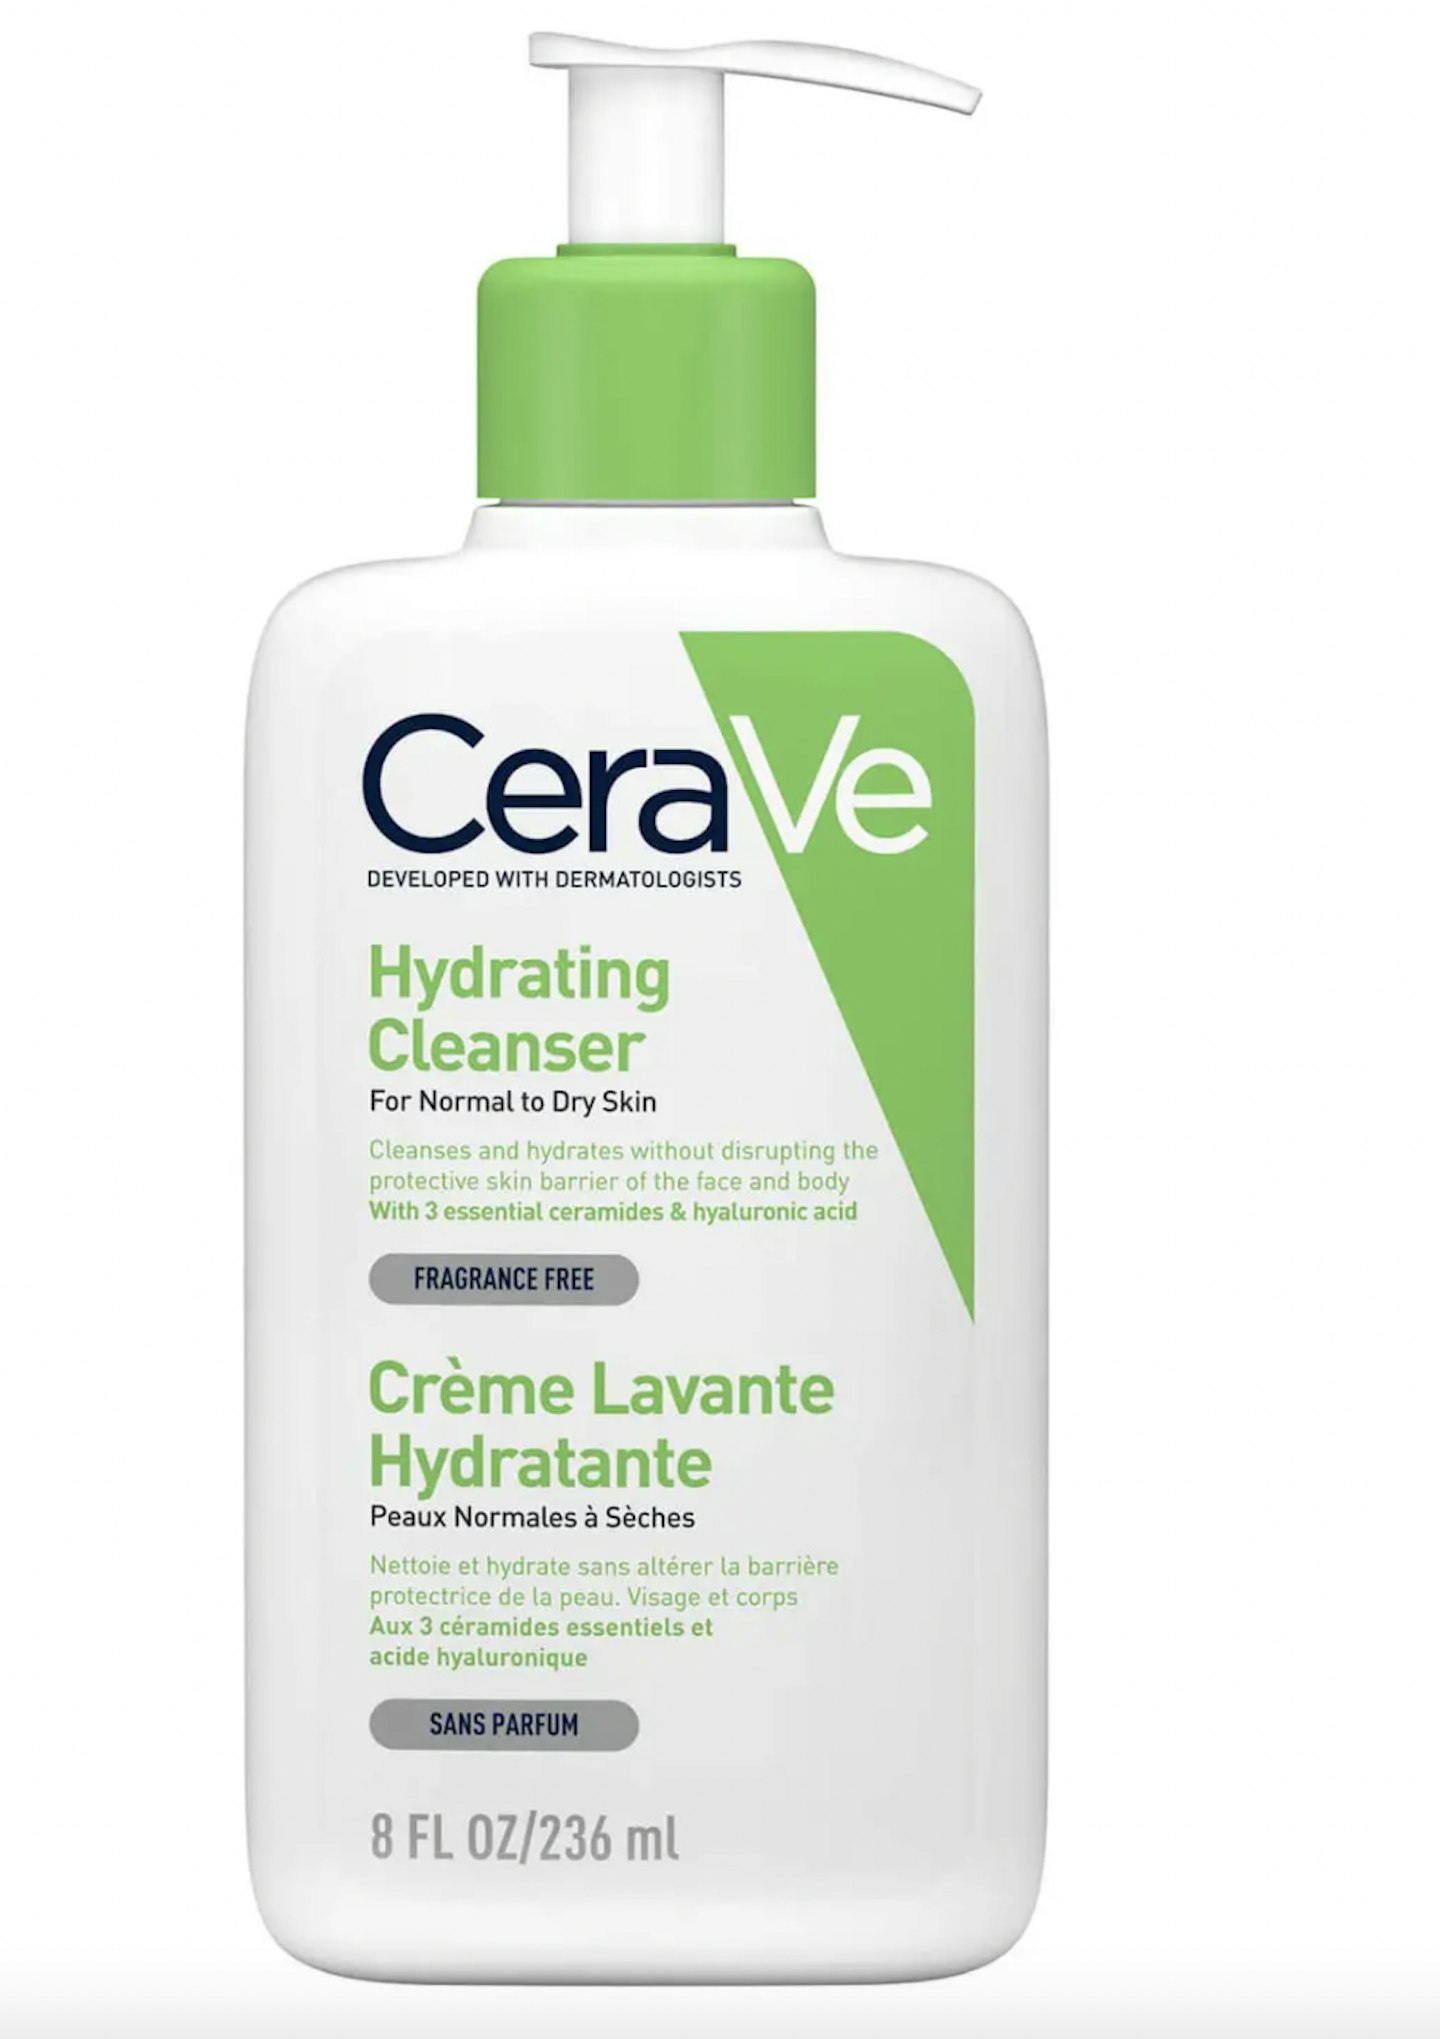 CeraVe Hydrating Cleanser, £9.50